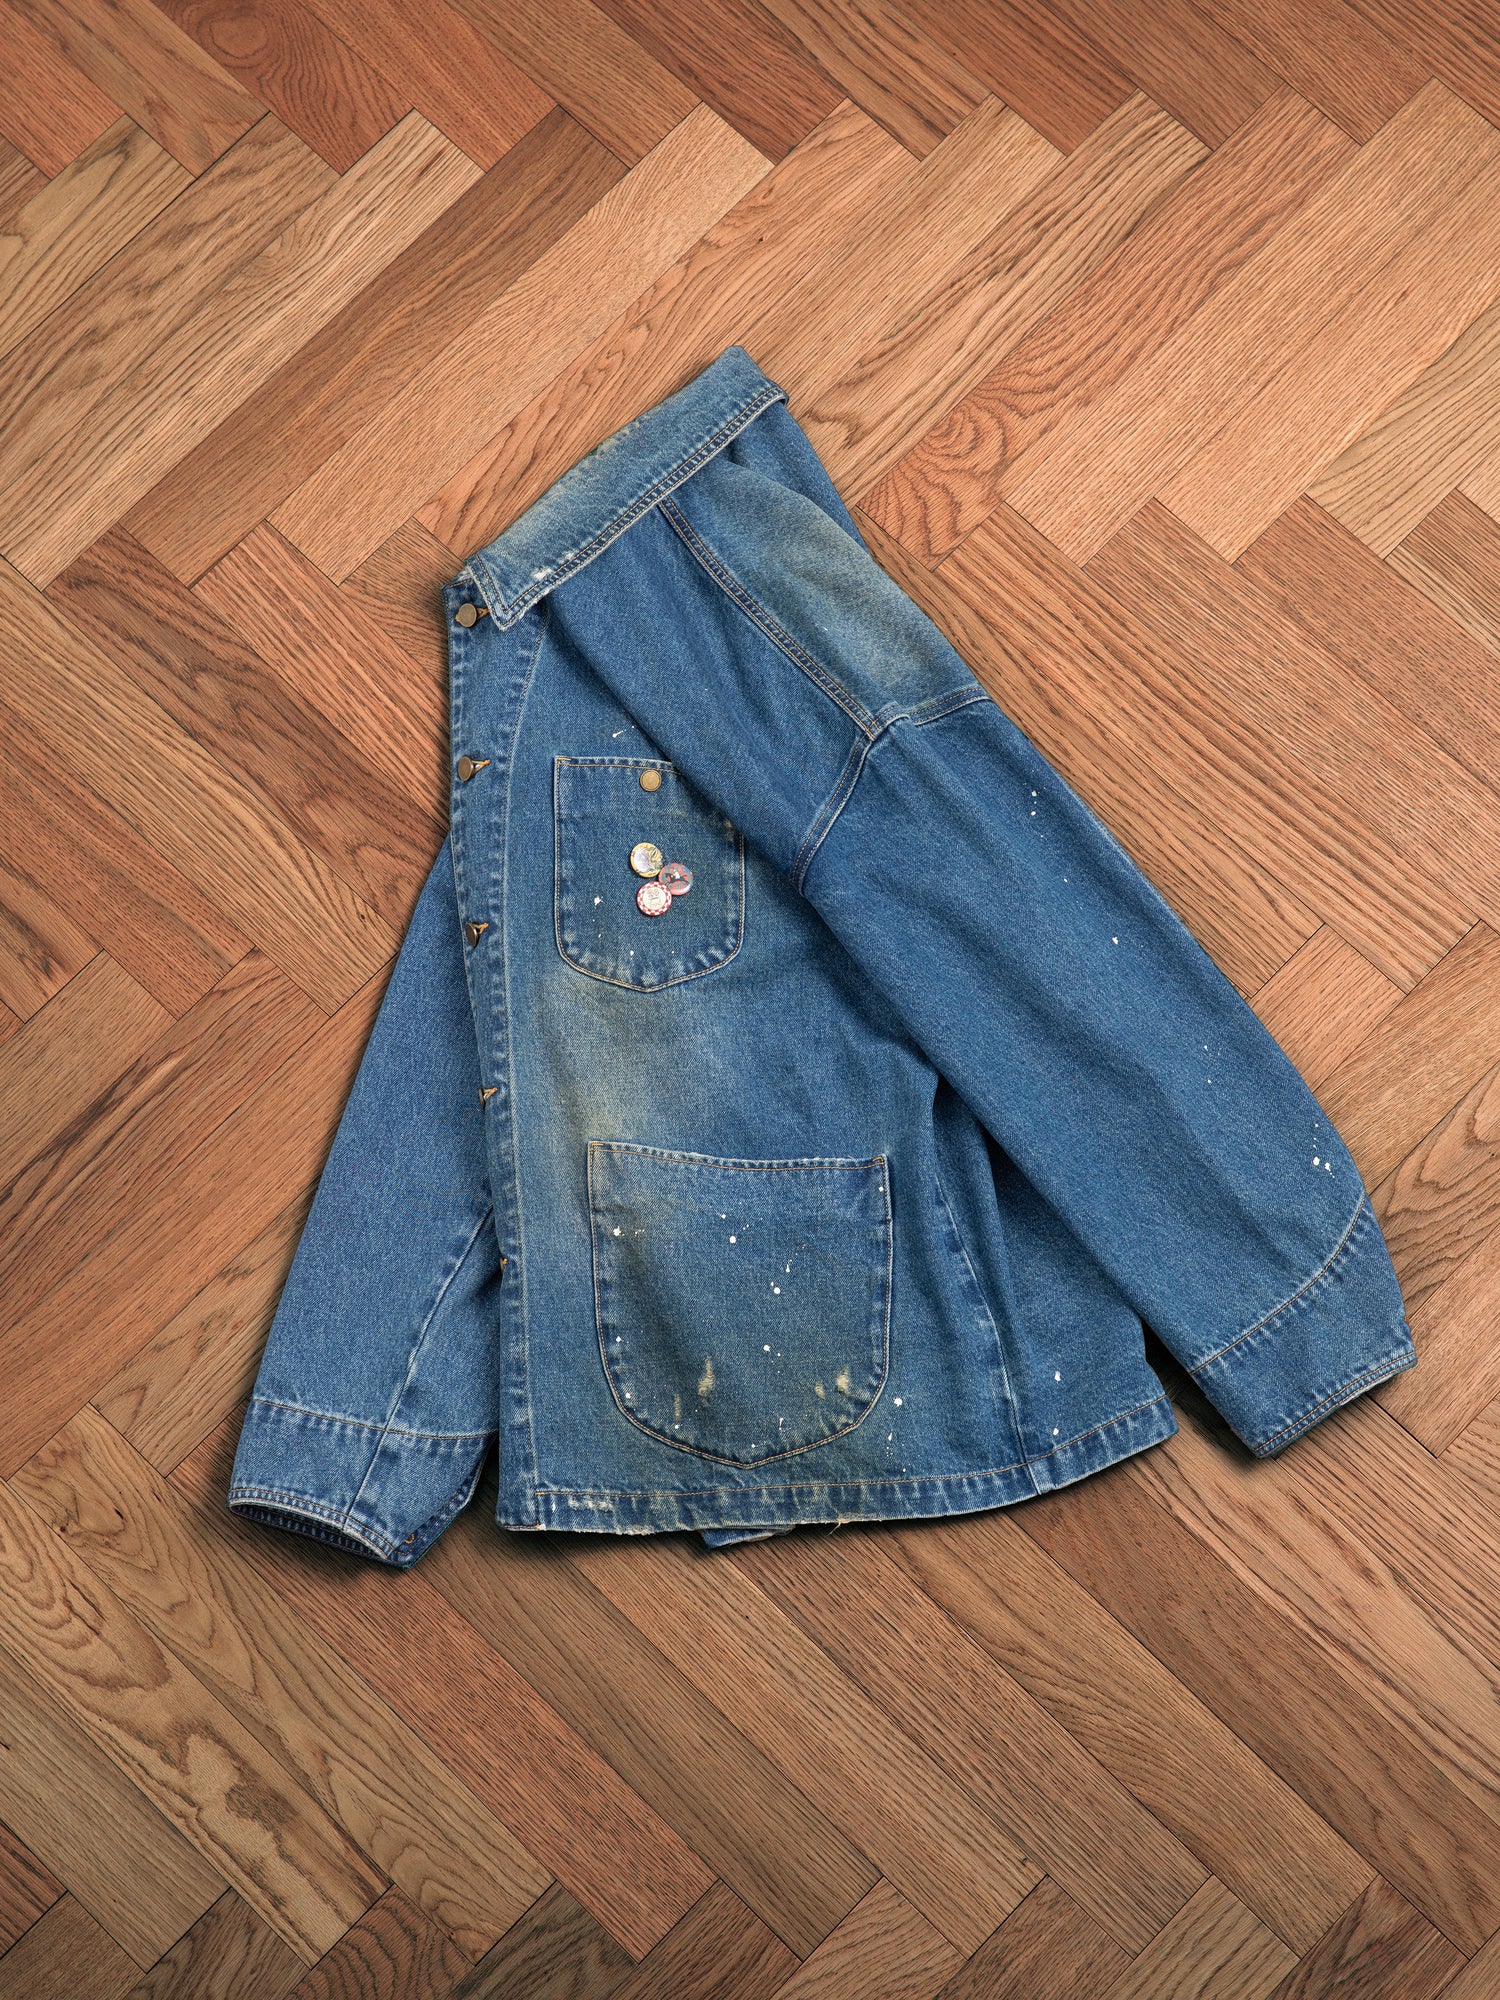 An artist's Kavir Denim Painter Jacket by Found laying on a wooden floor.